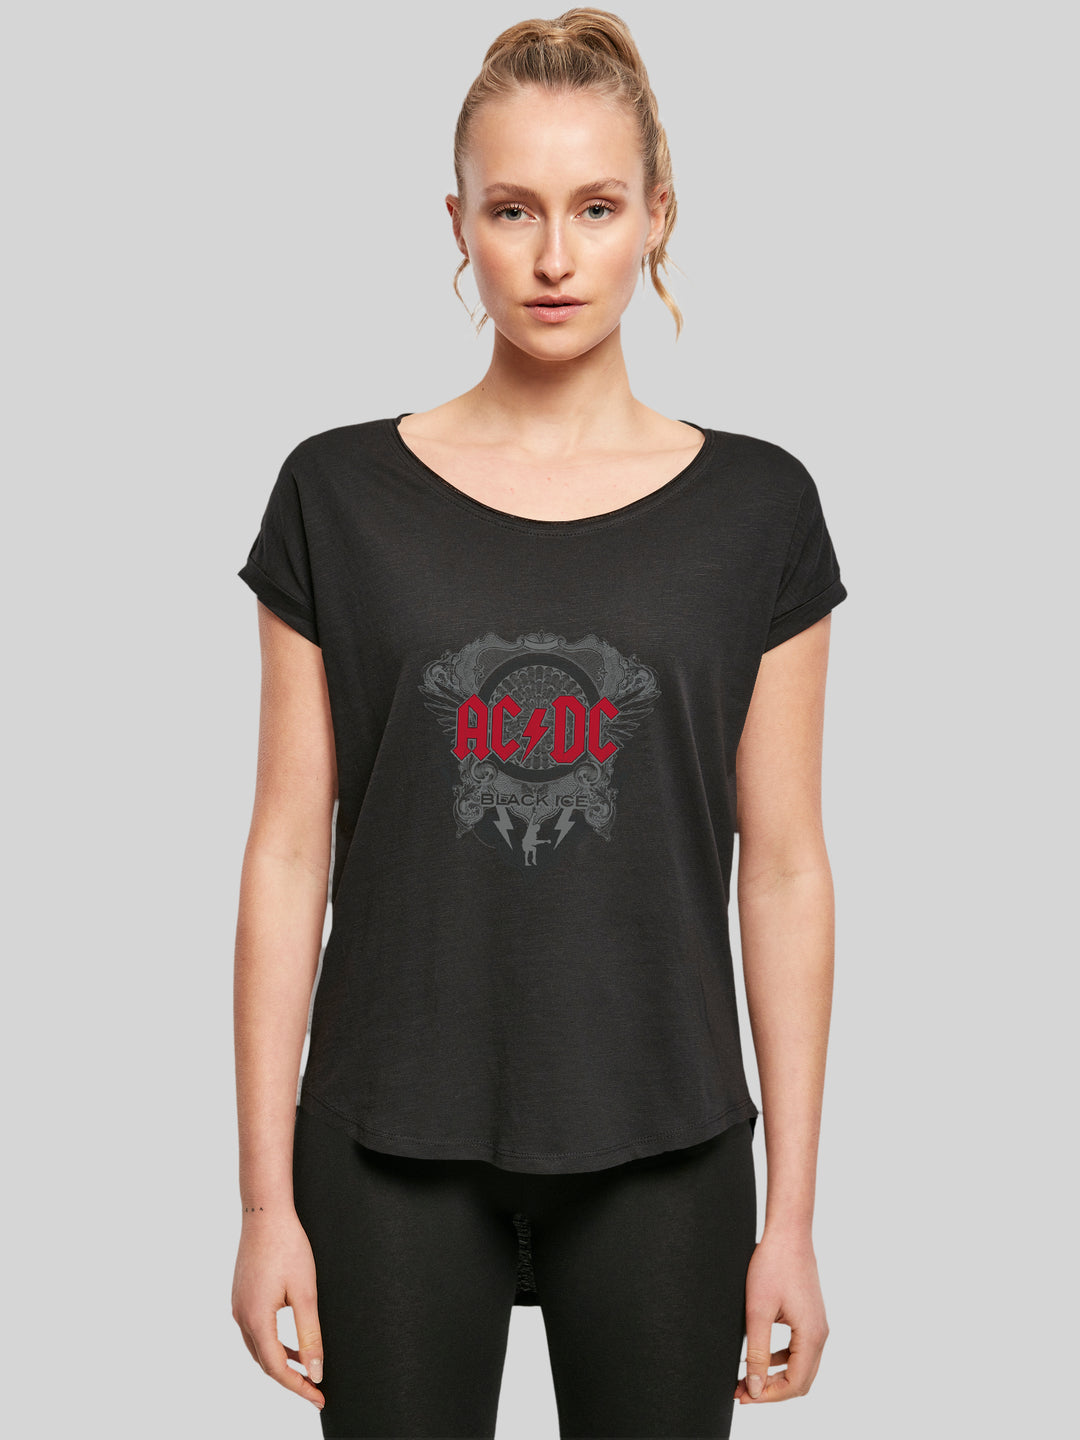 ACDC Black Ice with Red with Ladies Long Slub Tee